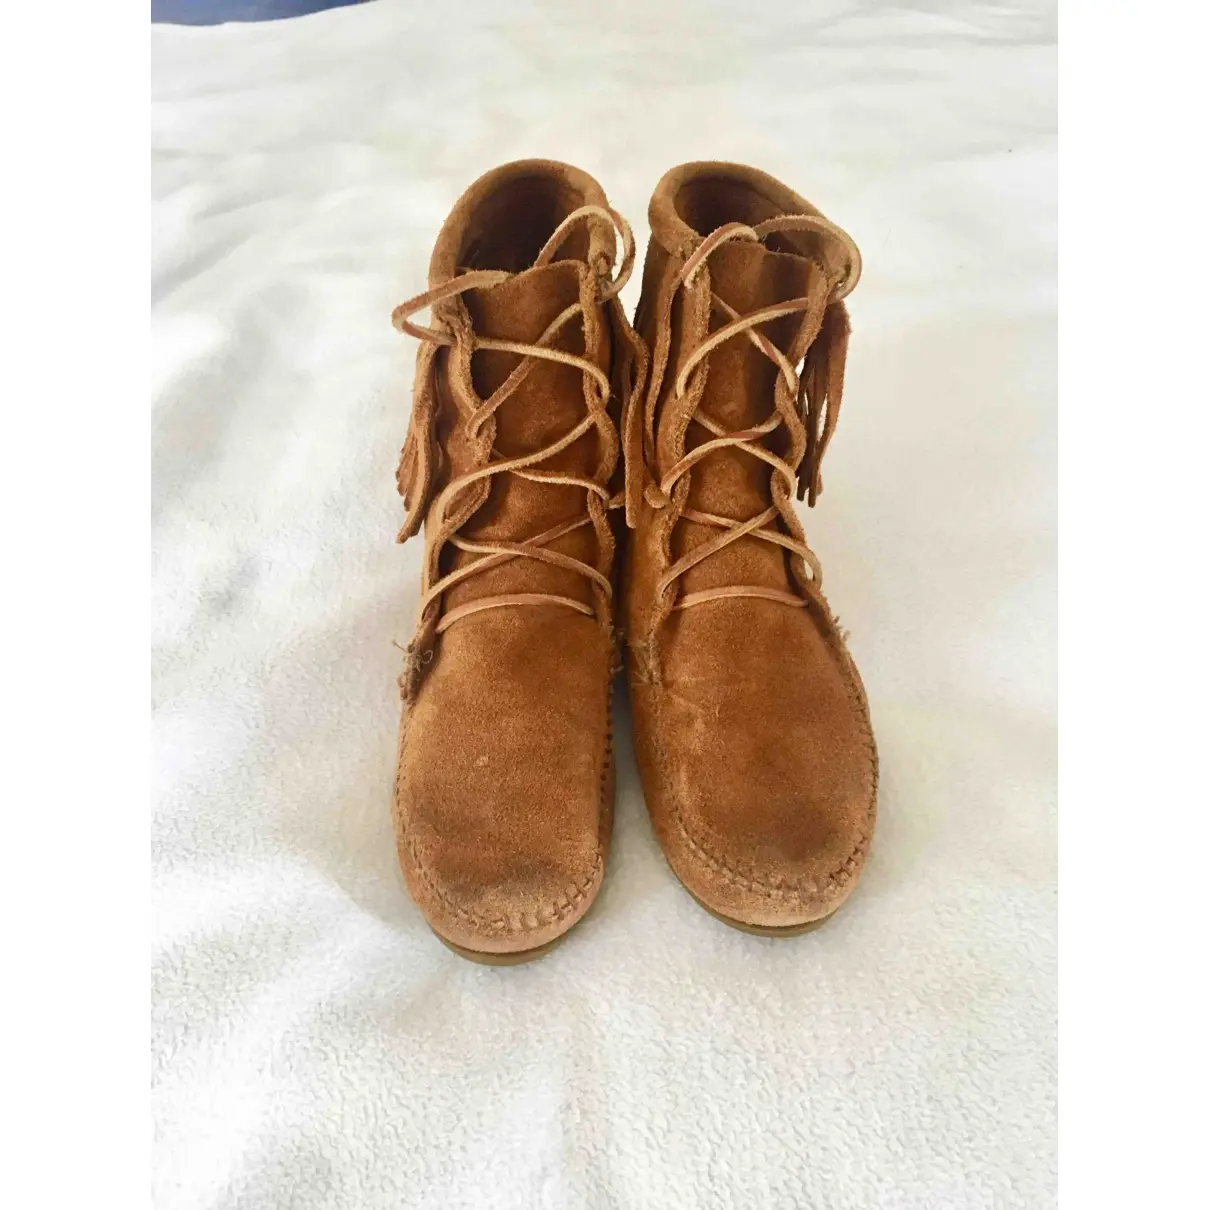 Minnetonka Lace up boots for sale